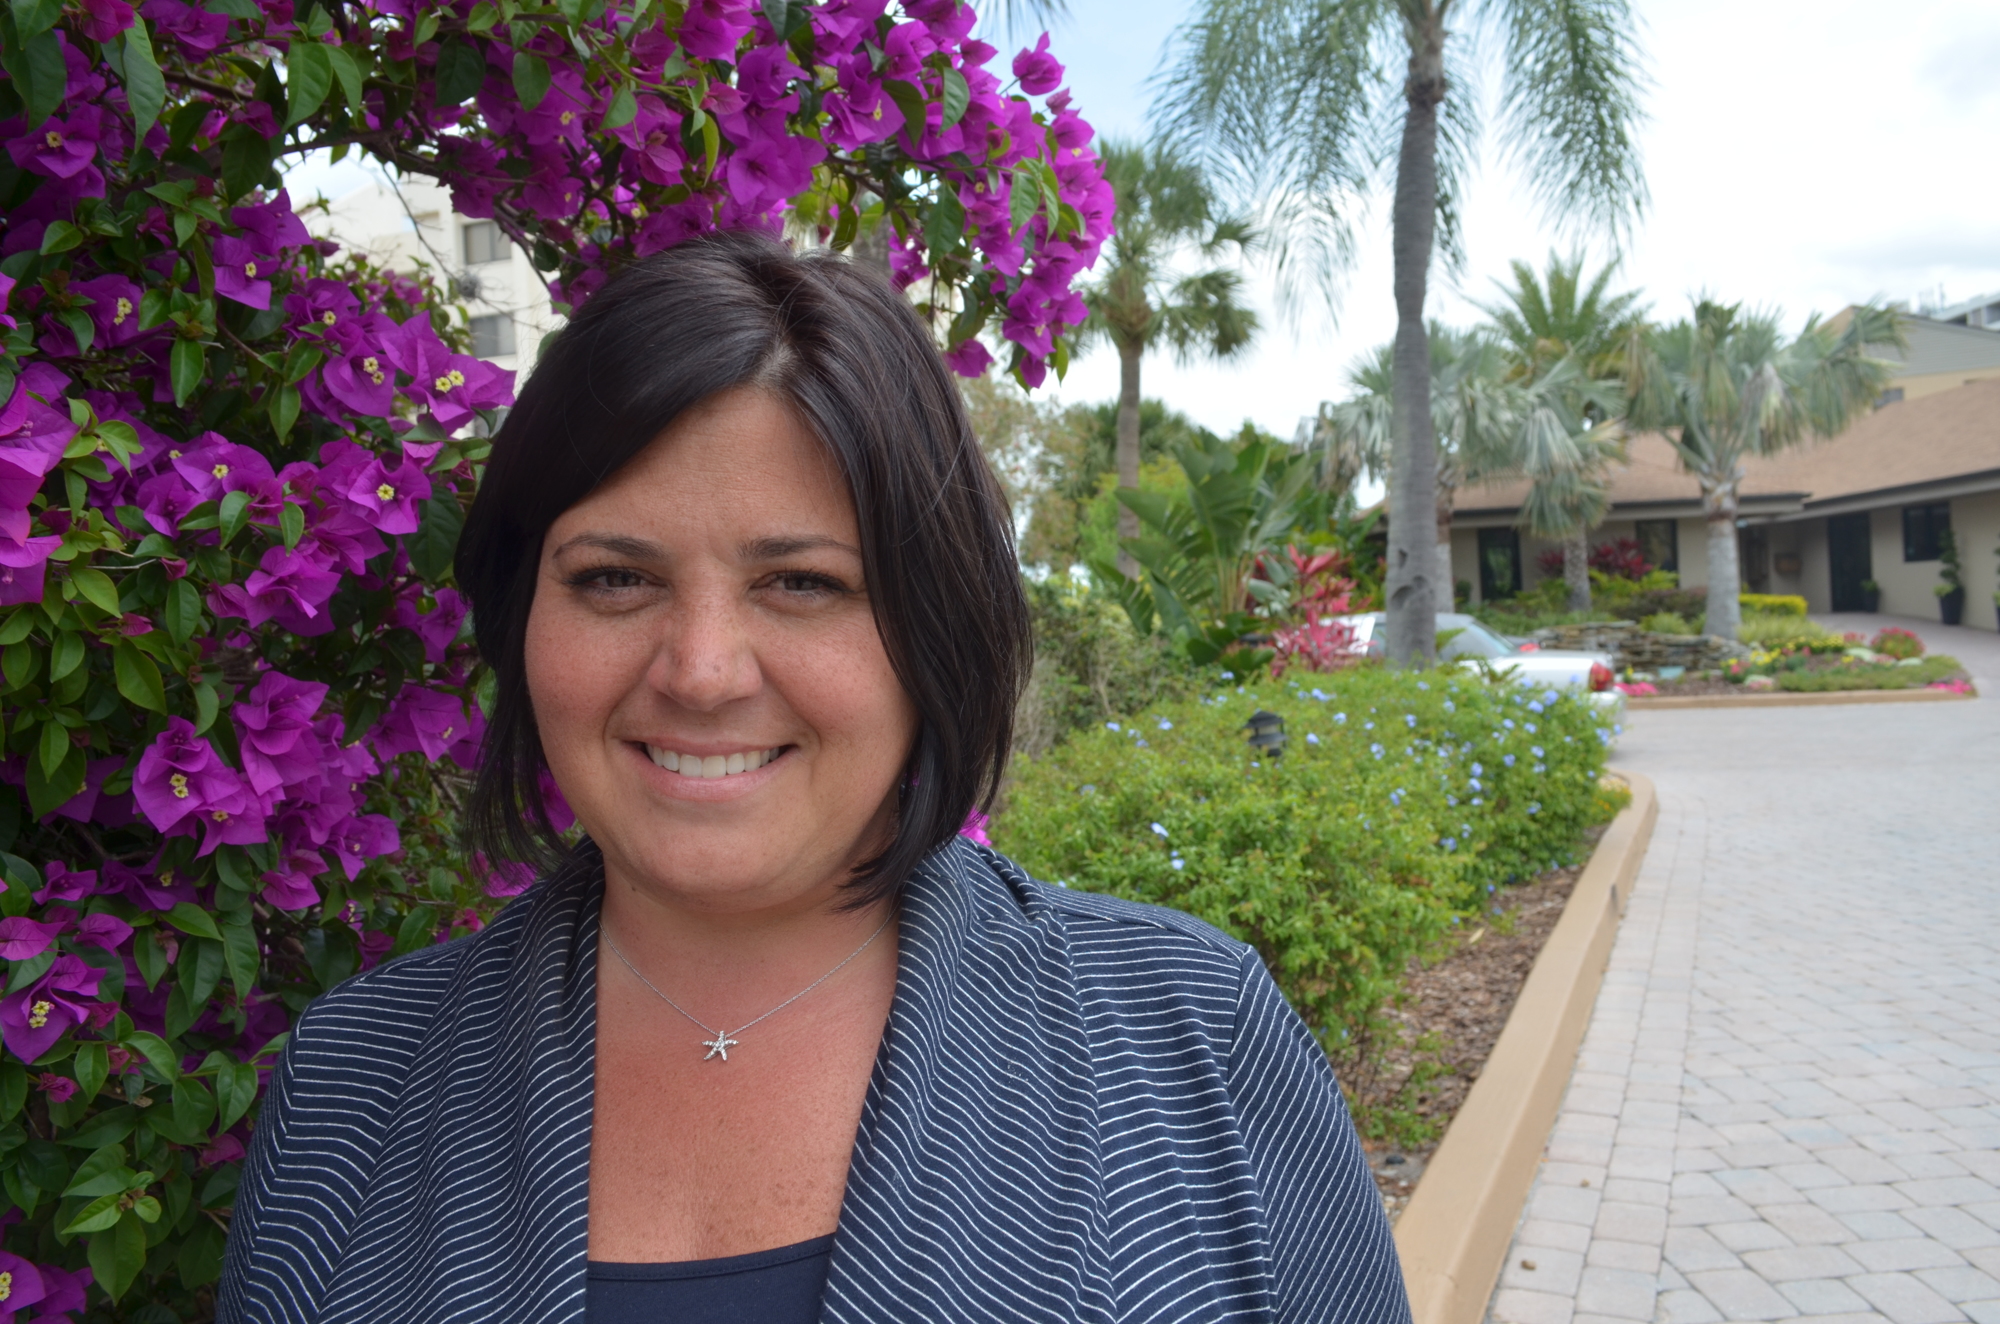 Although Alana Tomasso and the Siesta Key Chamber of Commerce are confident this year's event should be secure, the future of the fireworks still remain in question.